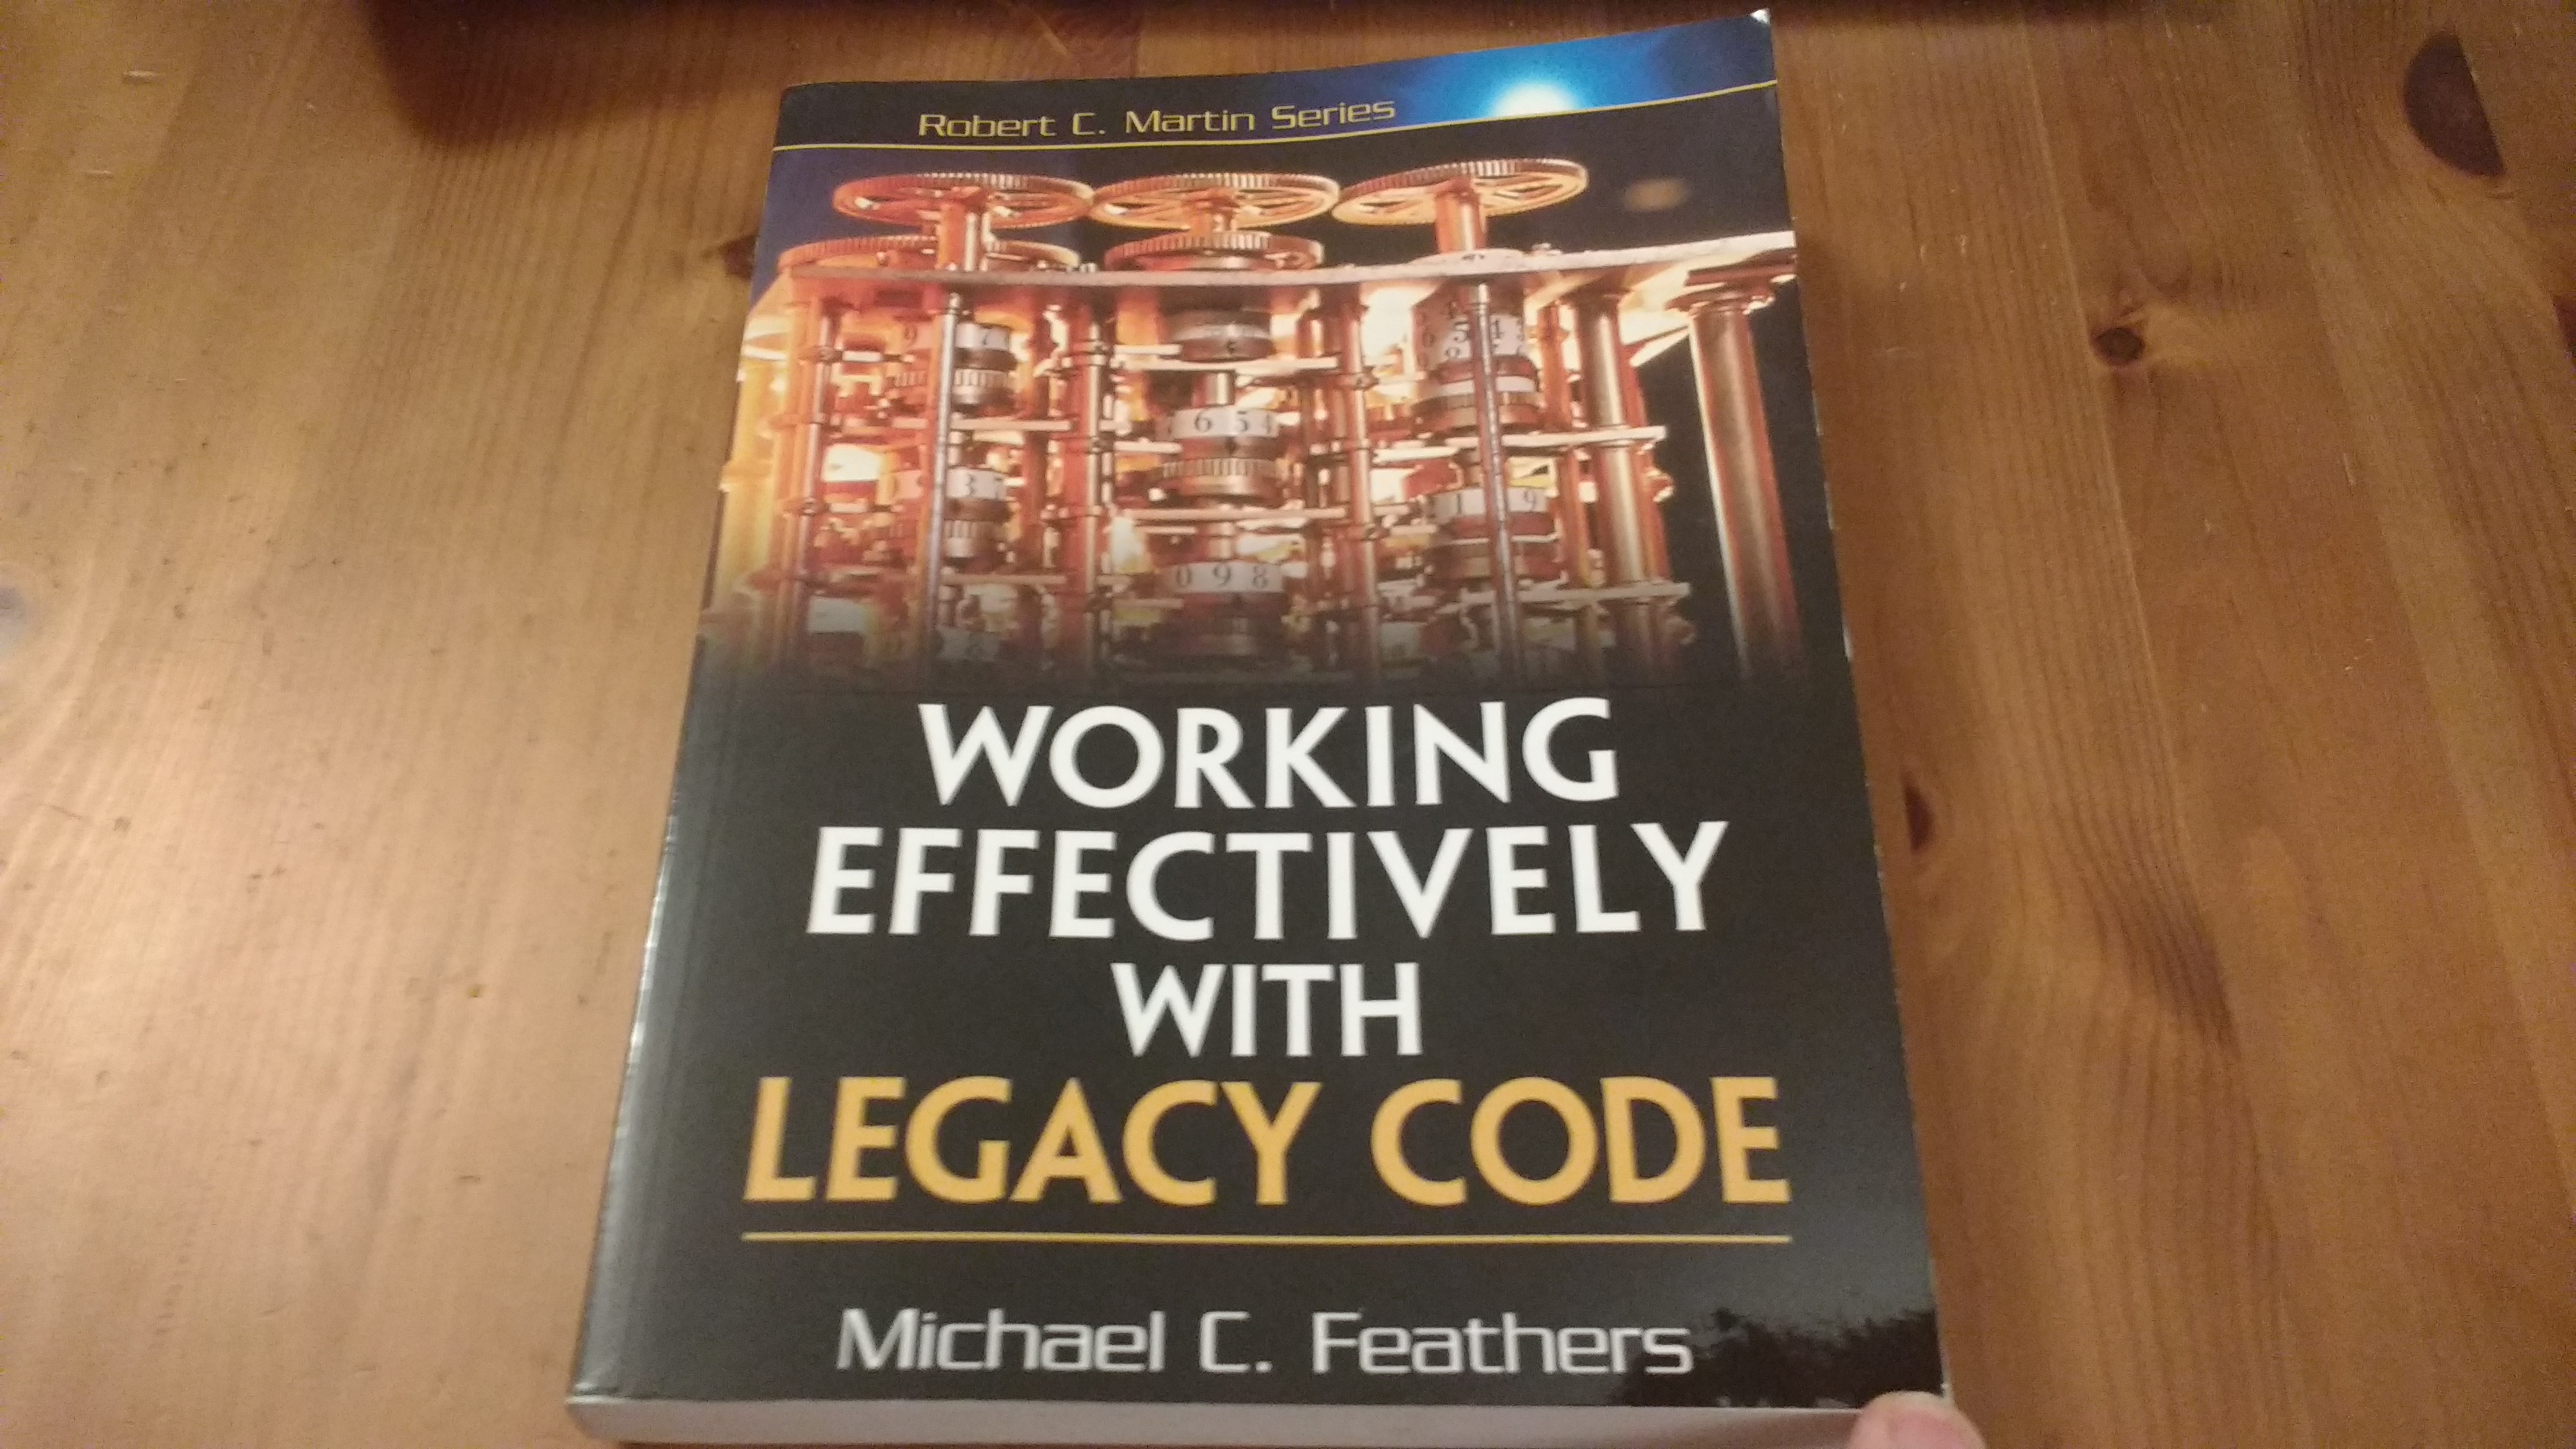 Working Effectively with Legacy Code by Michael Feathers